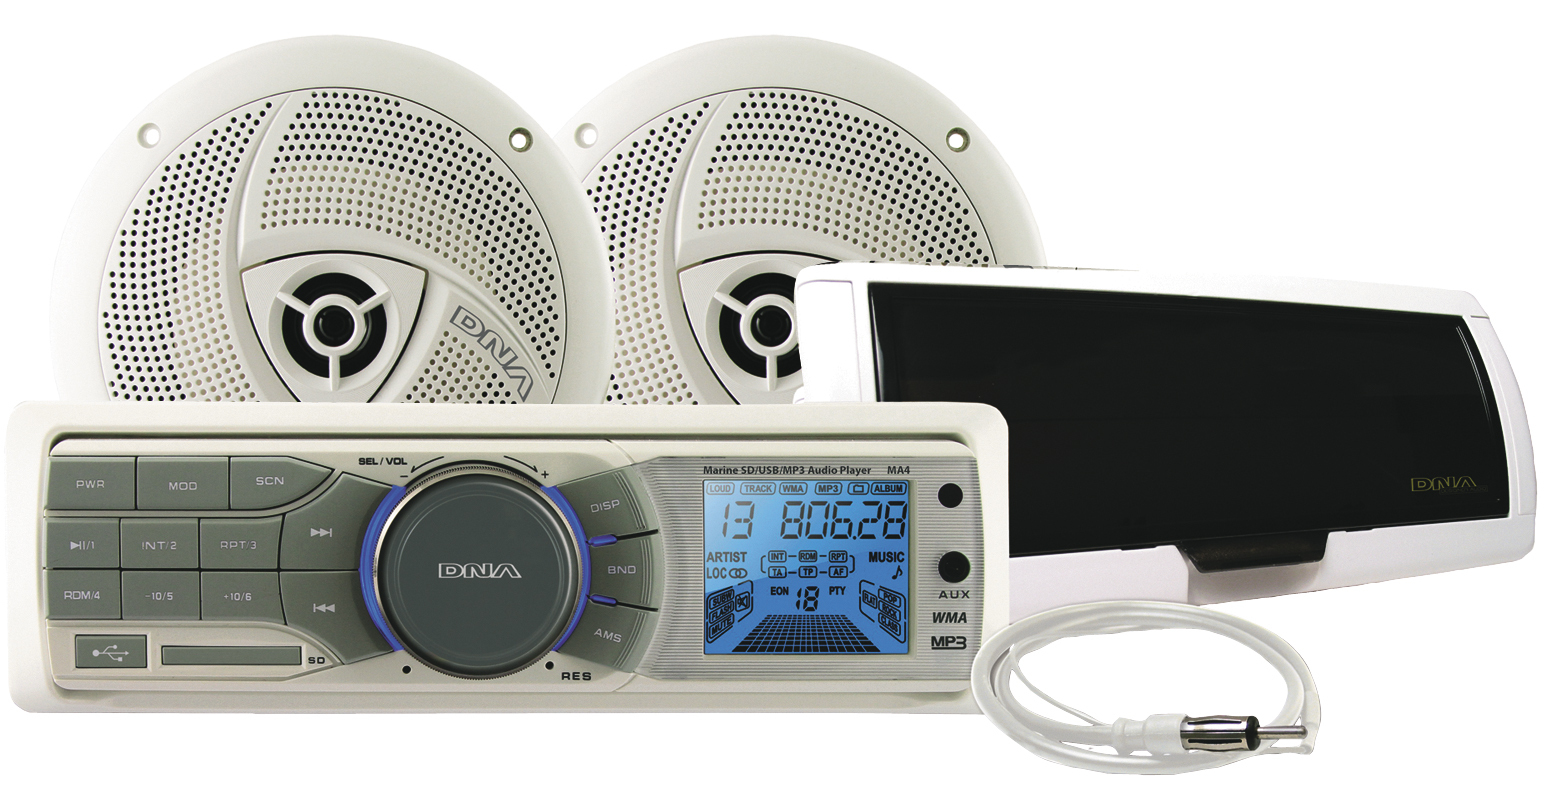 AM/FM Digital Stereo Media Player With 100 Watt Speakers, Antenna. Now With Bluetooth! 